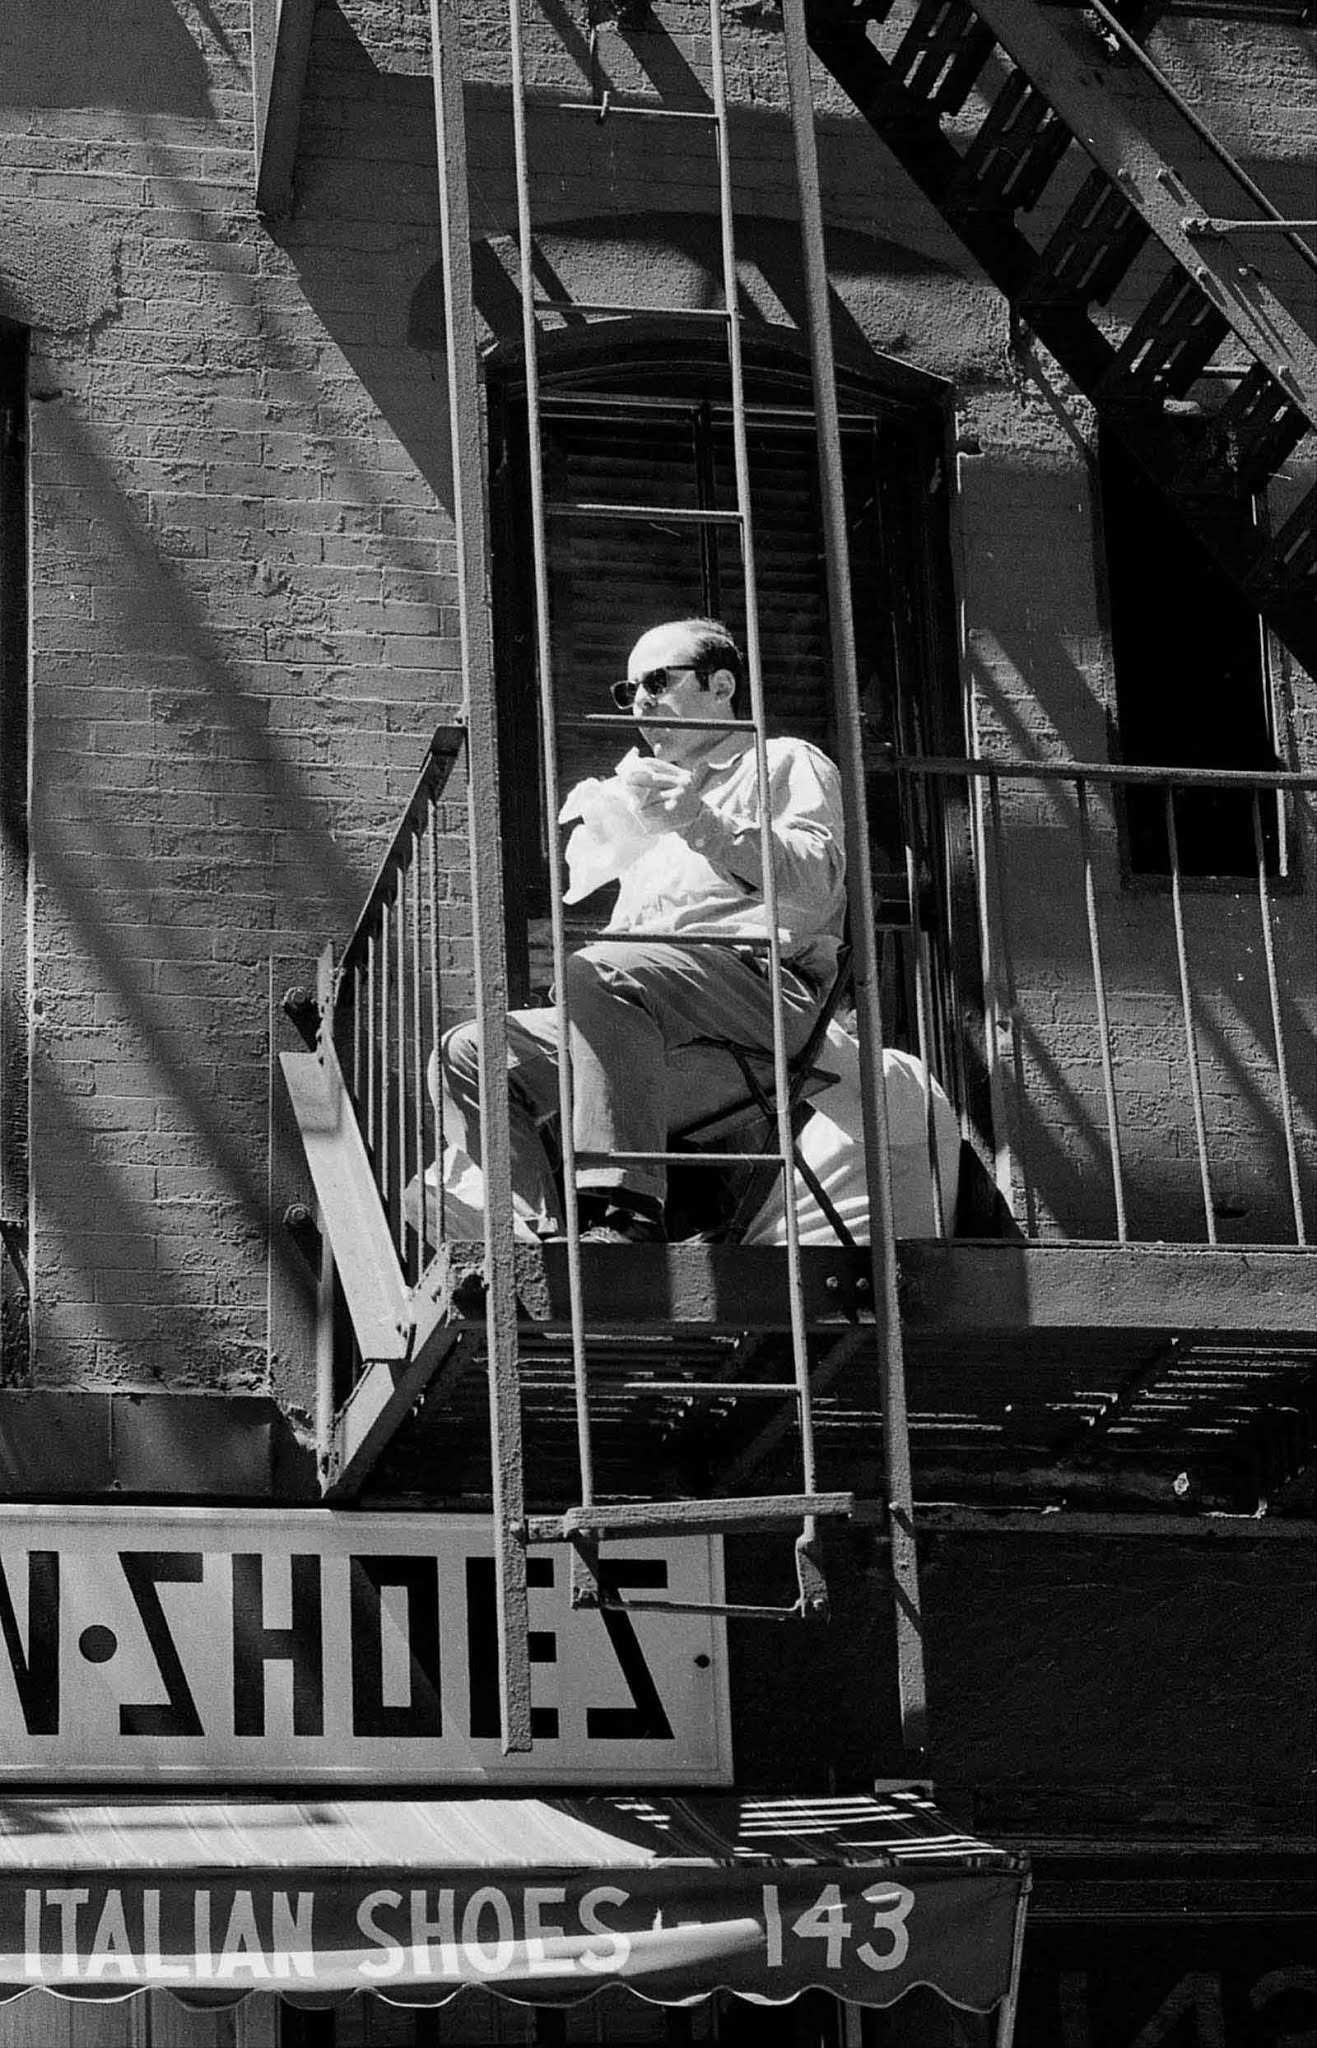 A Little Italy resident watches the production while eating lunch on his fire escape.